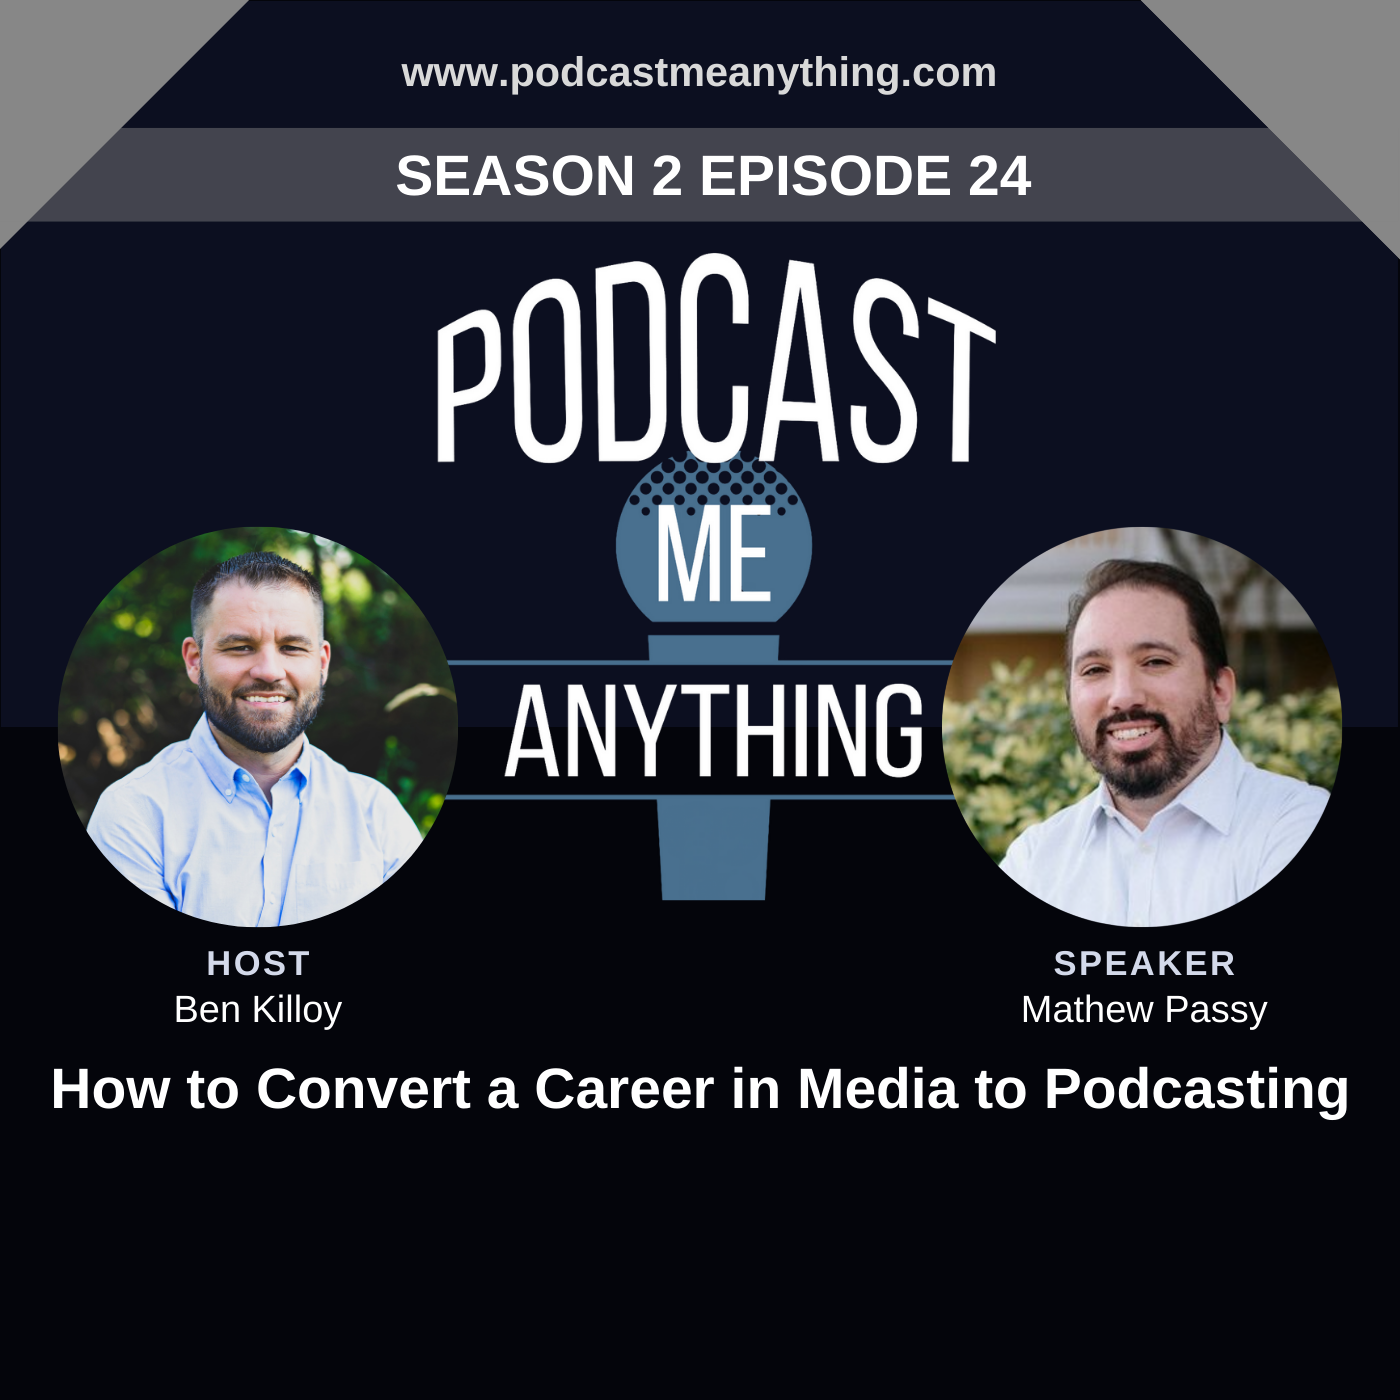 How to Convert a Career in Media to Podcasting